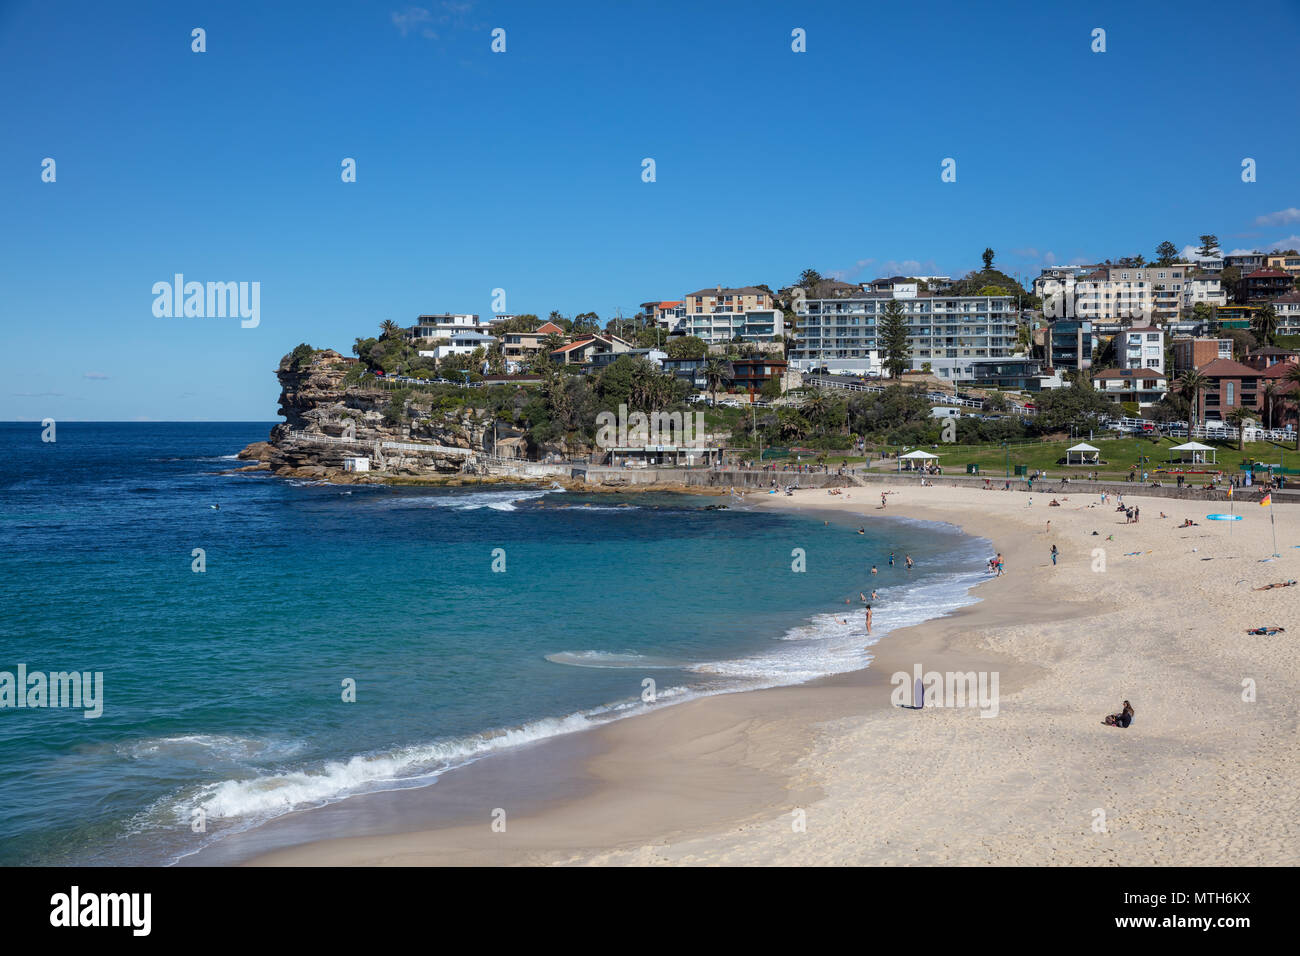 Swimming and surfing at Bronte beach in Sydney, NSW, Australia Stock Photo